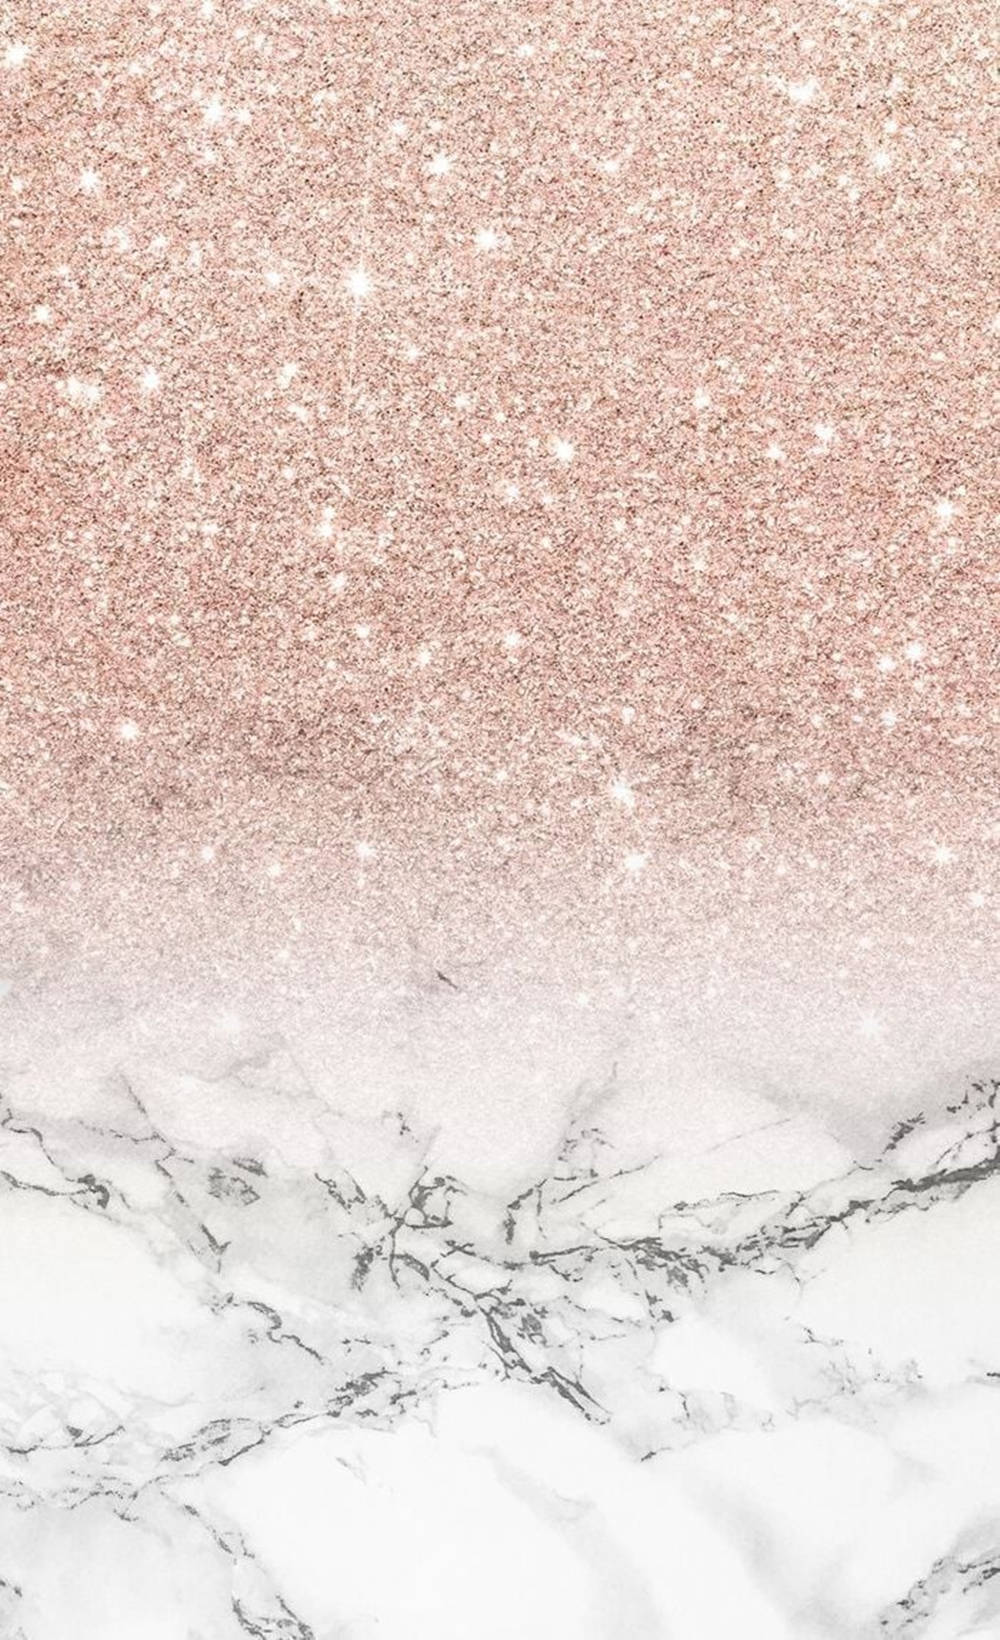 Rose Gold Ipad Glitters And Marble Background